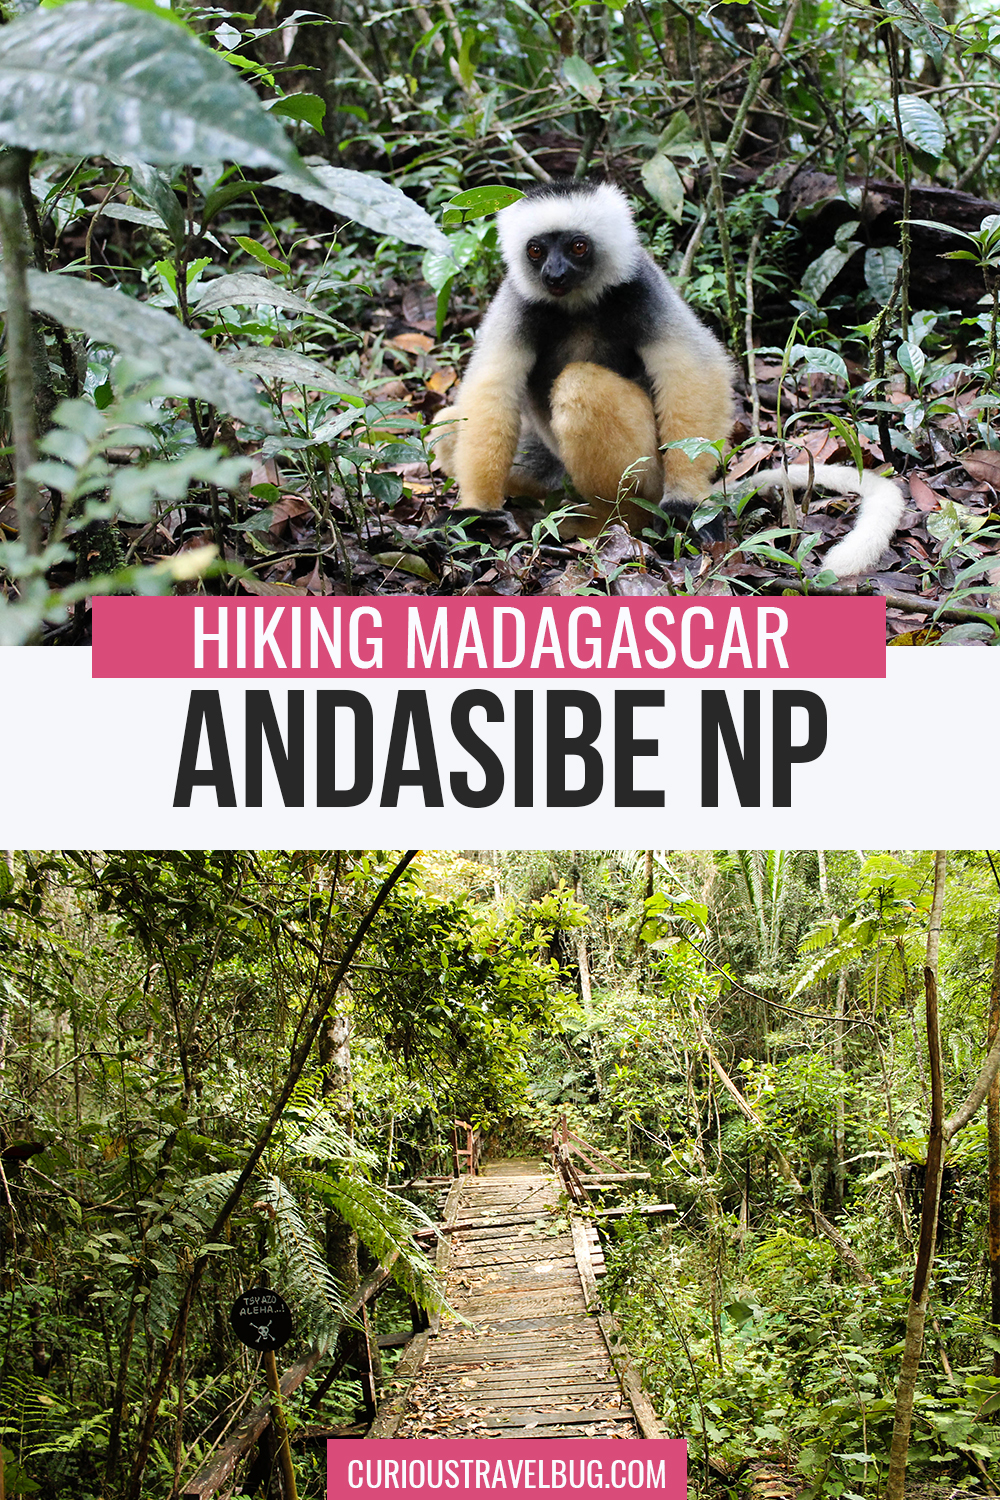 Travel to Madagascar and take in Andasibe National Park, a short day trip from the capital of Antananarivo, Madagascar. This day trip gives you a chance to see sifakas, indri and more lemurs as well as other native wildlife like chameleons, geckos, and birds. This is the perfect place to add to your Madagascar itinerary if you are traveling to the Red Island of Africa.